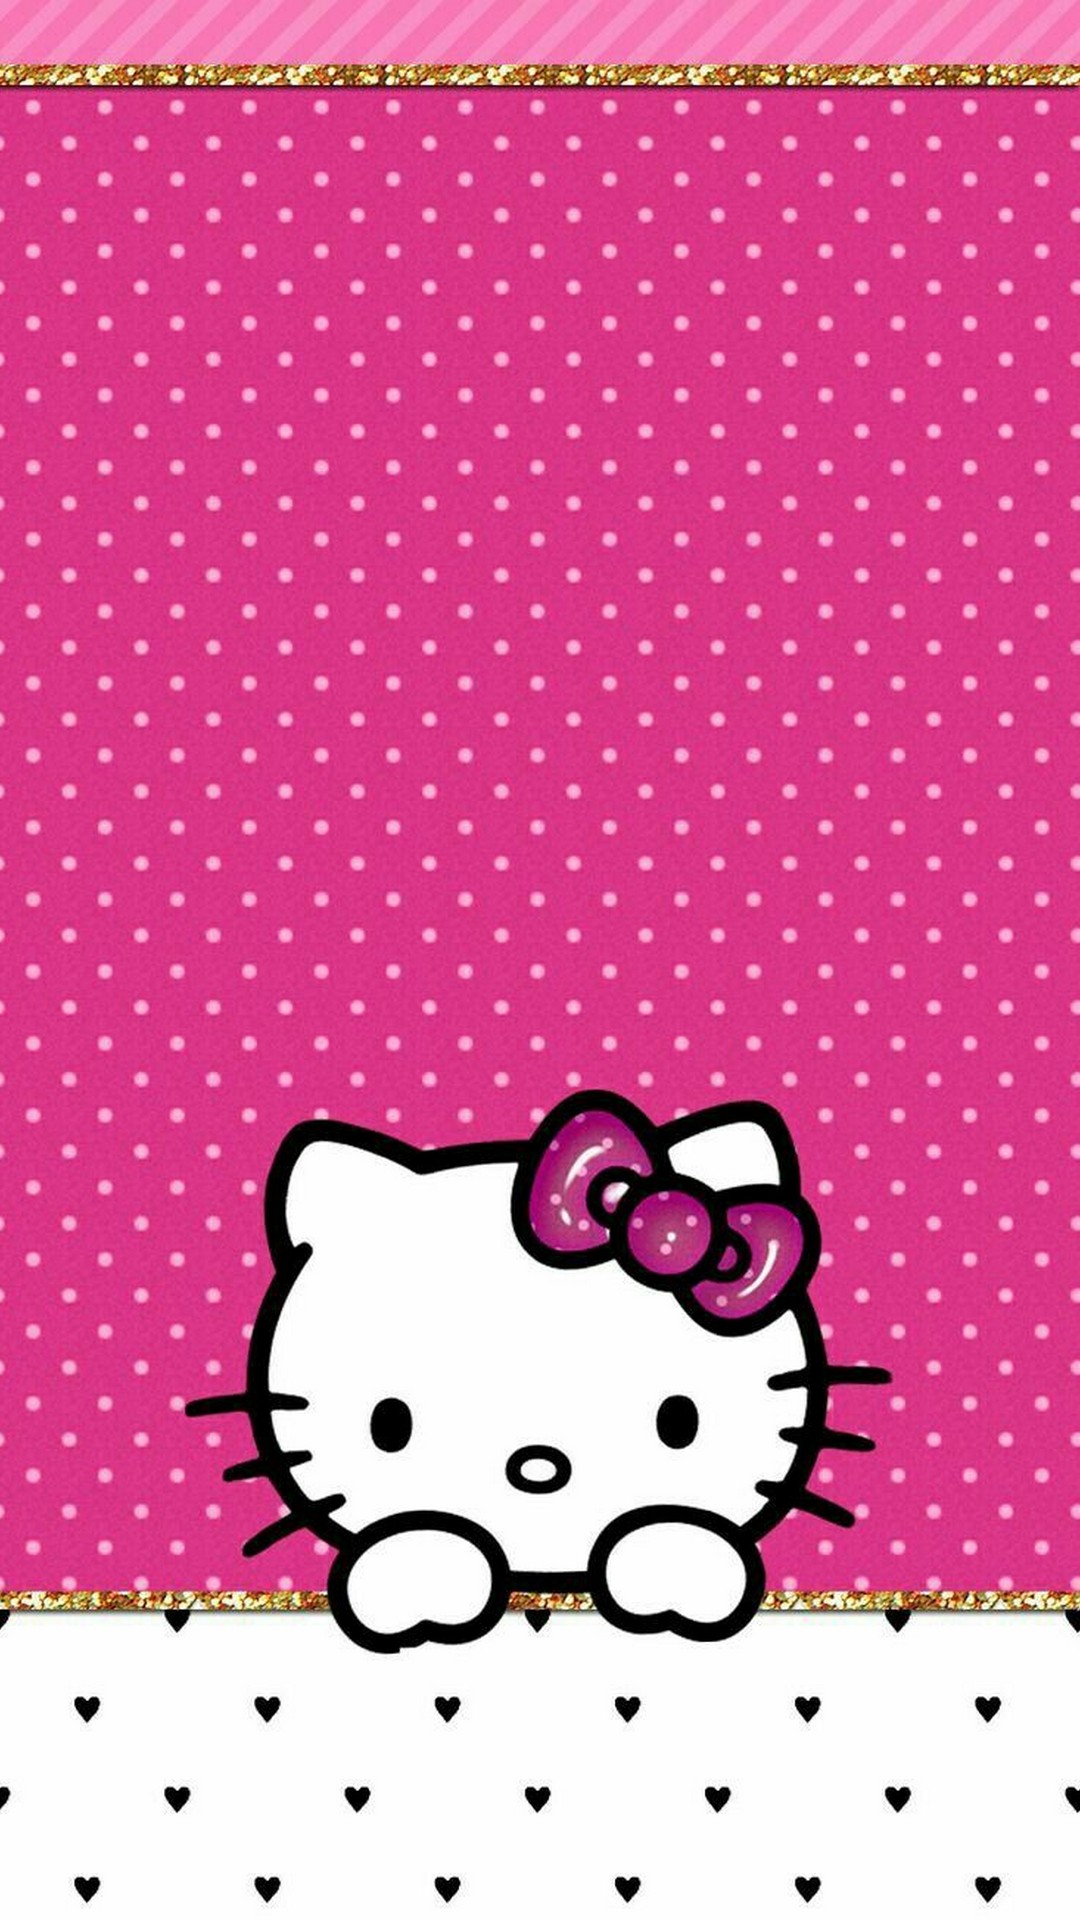 Android Wallpaper Hello Kitty Characters with resolution 1080X1920 pixel. You can make this wallpaper for your Android backgrounds, Tablet, Smartphones Screensavers and Mobile Phone Lock Screen